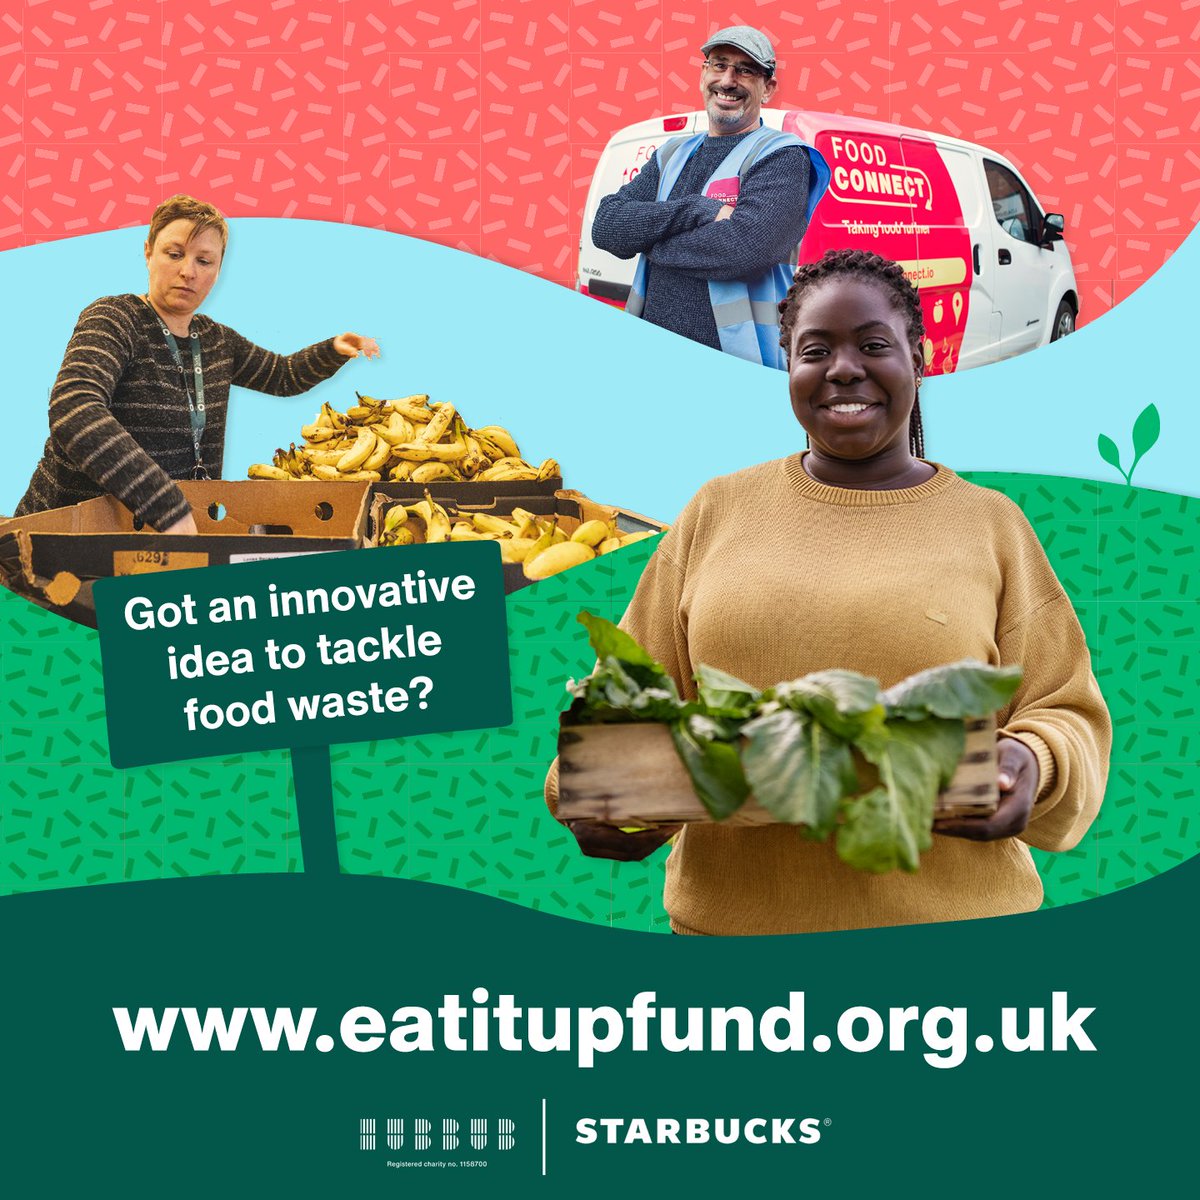 📢 Final call for applications! 📢 Have you got an innovative idea to tackle food waste? Submit an expression of interest by 5pm today: eatitupfund.org.uk